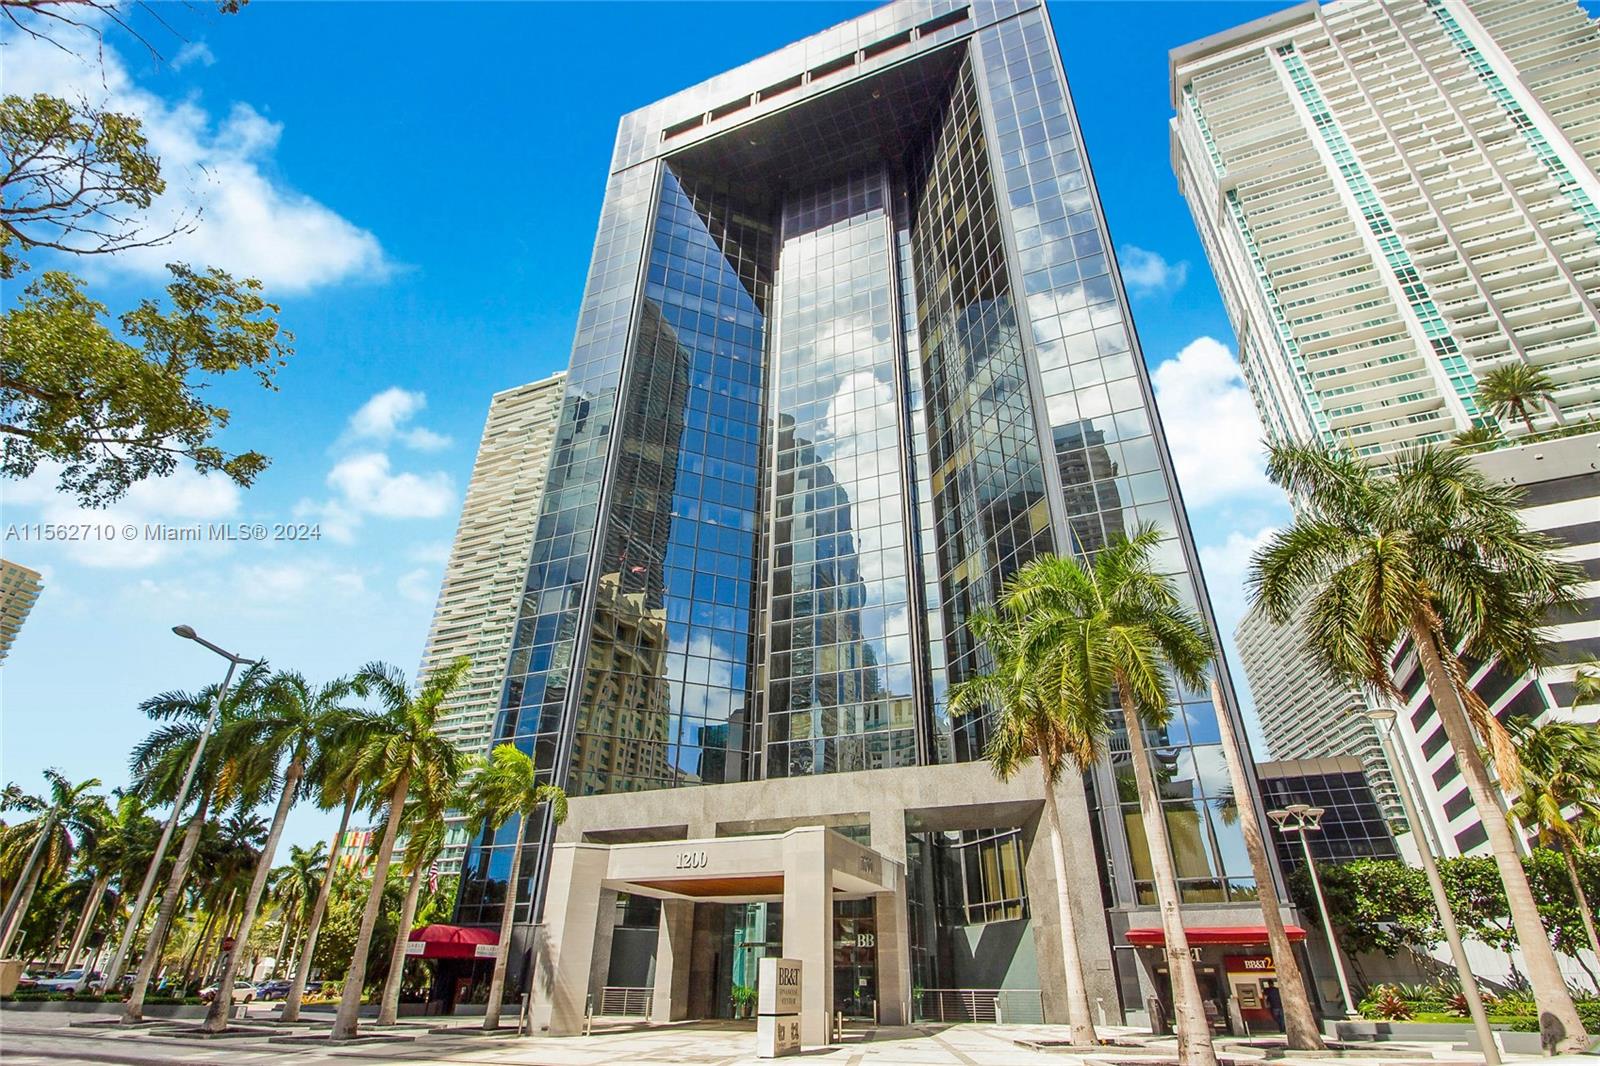 Amazing corner office overlooking Brickell Avenue with 3 private offices, 1 conference room, break room and large open working area. Tenant to vacate by end of April 2024.

Strategically located on the best and most exposed corner of Brickell Avenue (Coral Way and Brickell), surrounded by a mecca of international banking and commerce. All this complemented by the charm and convenience of Brickell City Centre and Mary Brickell Village located just around the corner.  The building sits Next to Miami’s finest hotels and restaurants, including the Award Winning  “Dirty French" located in the building's ground floor.